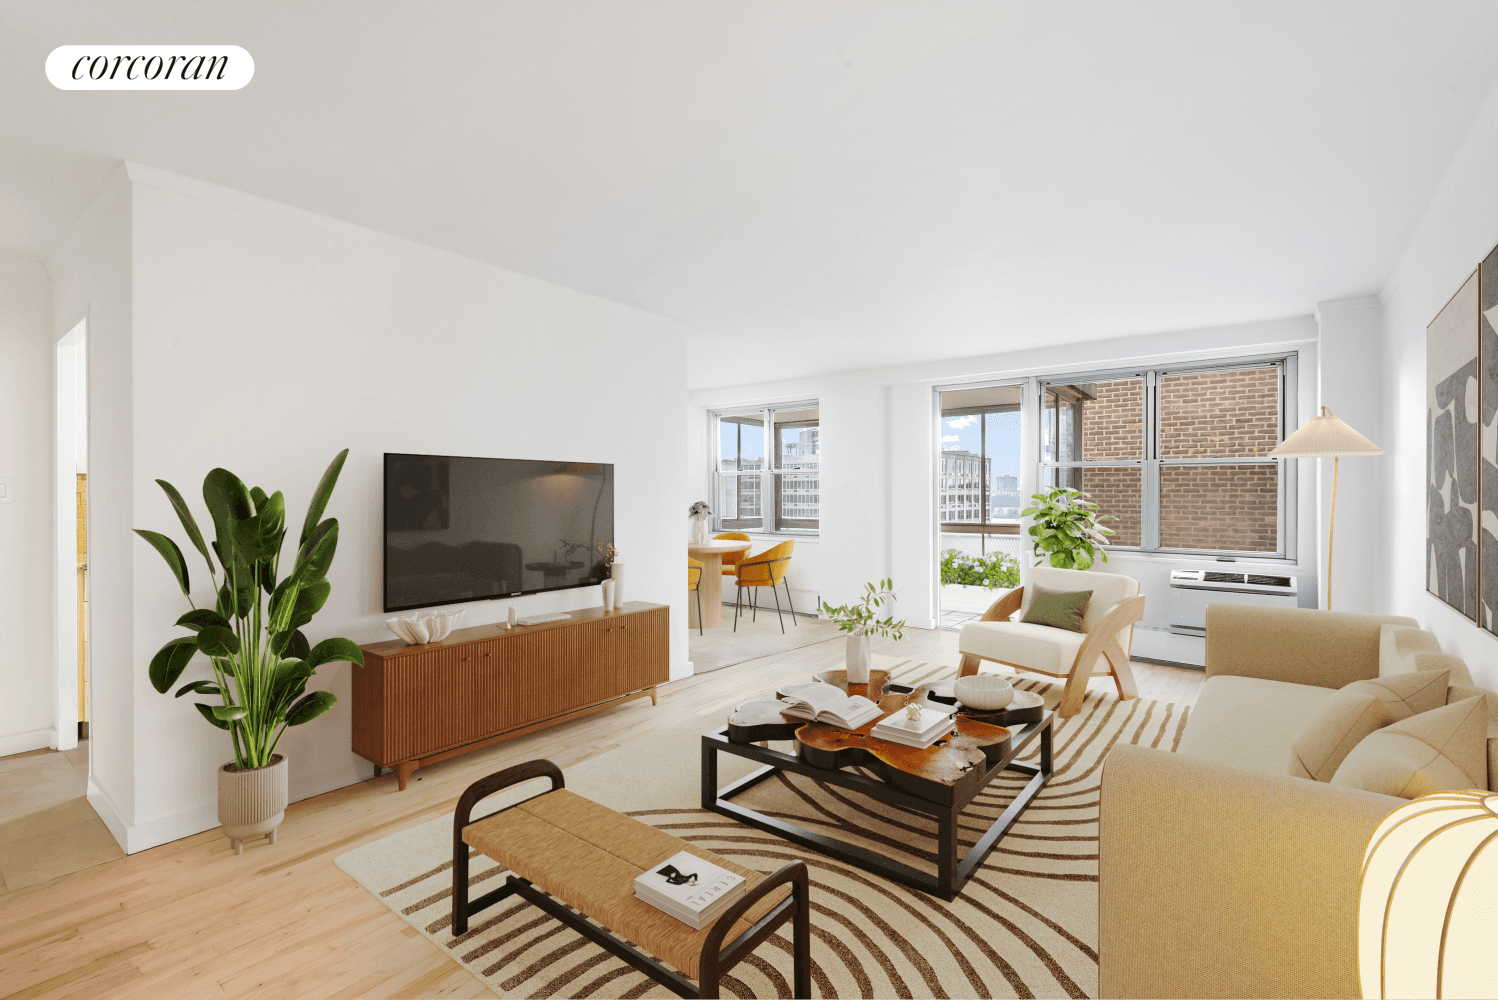 Welcome to 303 West 66th Street, Unit 19DE, your dream living space in the heart of bustling Lincoln Square.